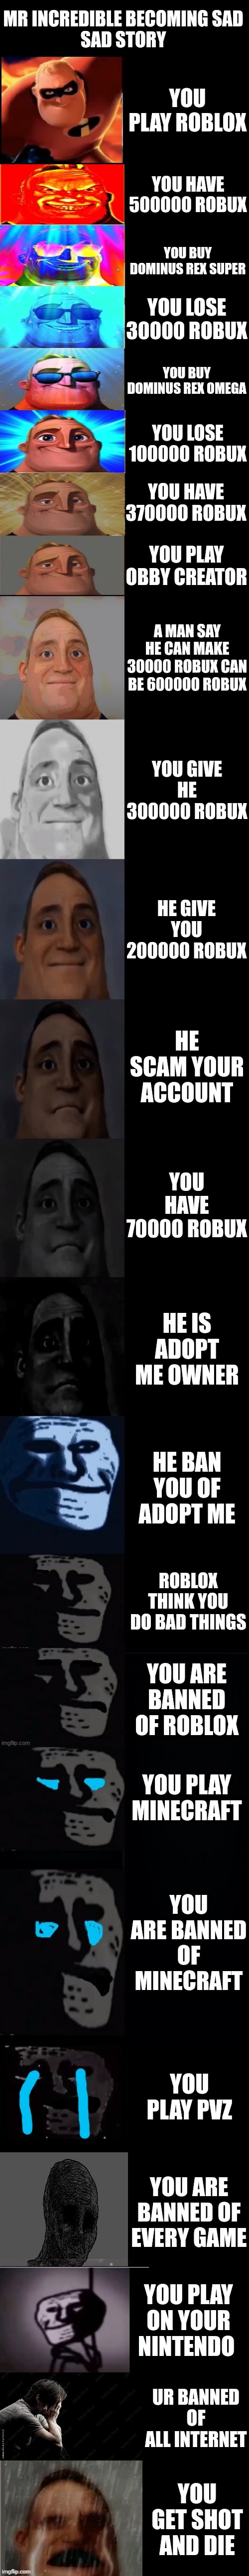 Sad story :( | MR INCREDIBLE BECOMING SAD
SAD STORY; YOU PLAY ROBLOX; YOU HAVE 500000 ROBUX; YOU BUY DOMINUS REX SUPER; YOU LOSE 30000 ROBUX; YOU BUY DOMINUS REX OMEGA; YOU LOSE 100000 ROBUX; YOU HAVE 370000 ROBUX; YOU PLAY OBBY CREATOR; A MAN SAY HE CAN MAKE 30000 ROBUX CAN BE 600000 ROBUX; YOU GIVE HE 300000 ROBUX; HE GIVE YOU 200000 ROBUX; HE SCAM YOUR ACCOUNT; YOU HAVE 70000 ROBUX; HE IS ADOPT ME OWNER; HE BAN YOU OF ADOPT ME; ROBLOX THINK YOU DO BAD THINGS; YOU ARE BANNED OF ROBLOX; YOU PLAY MINECRAFT; YOU ARE BANNED OF MINECRAFT; YOU PLAY PVZ; YOU ARE BANNED OF EVERY GAME; YOU PLAY ON YOUR NINTENDO; UR BANNED OF ALL INTERNET; YOU GET SHOT AND DIE | image tagged in mr incredible becoming sad 3rd extension,sad | made w/ Imgflip meme maker